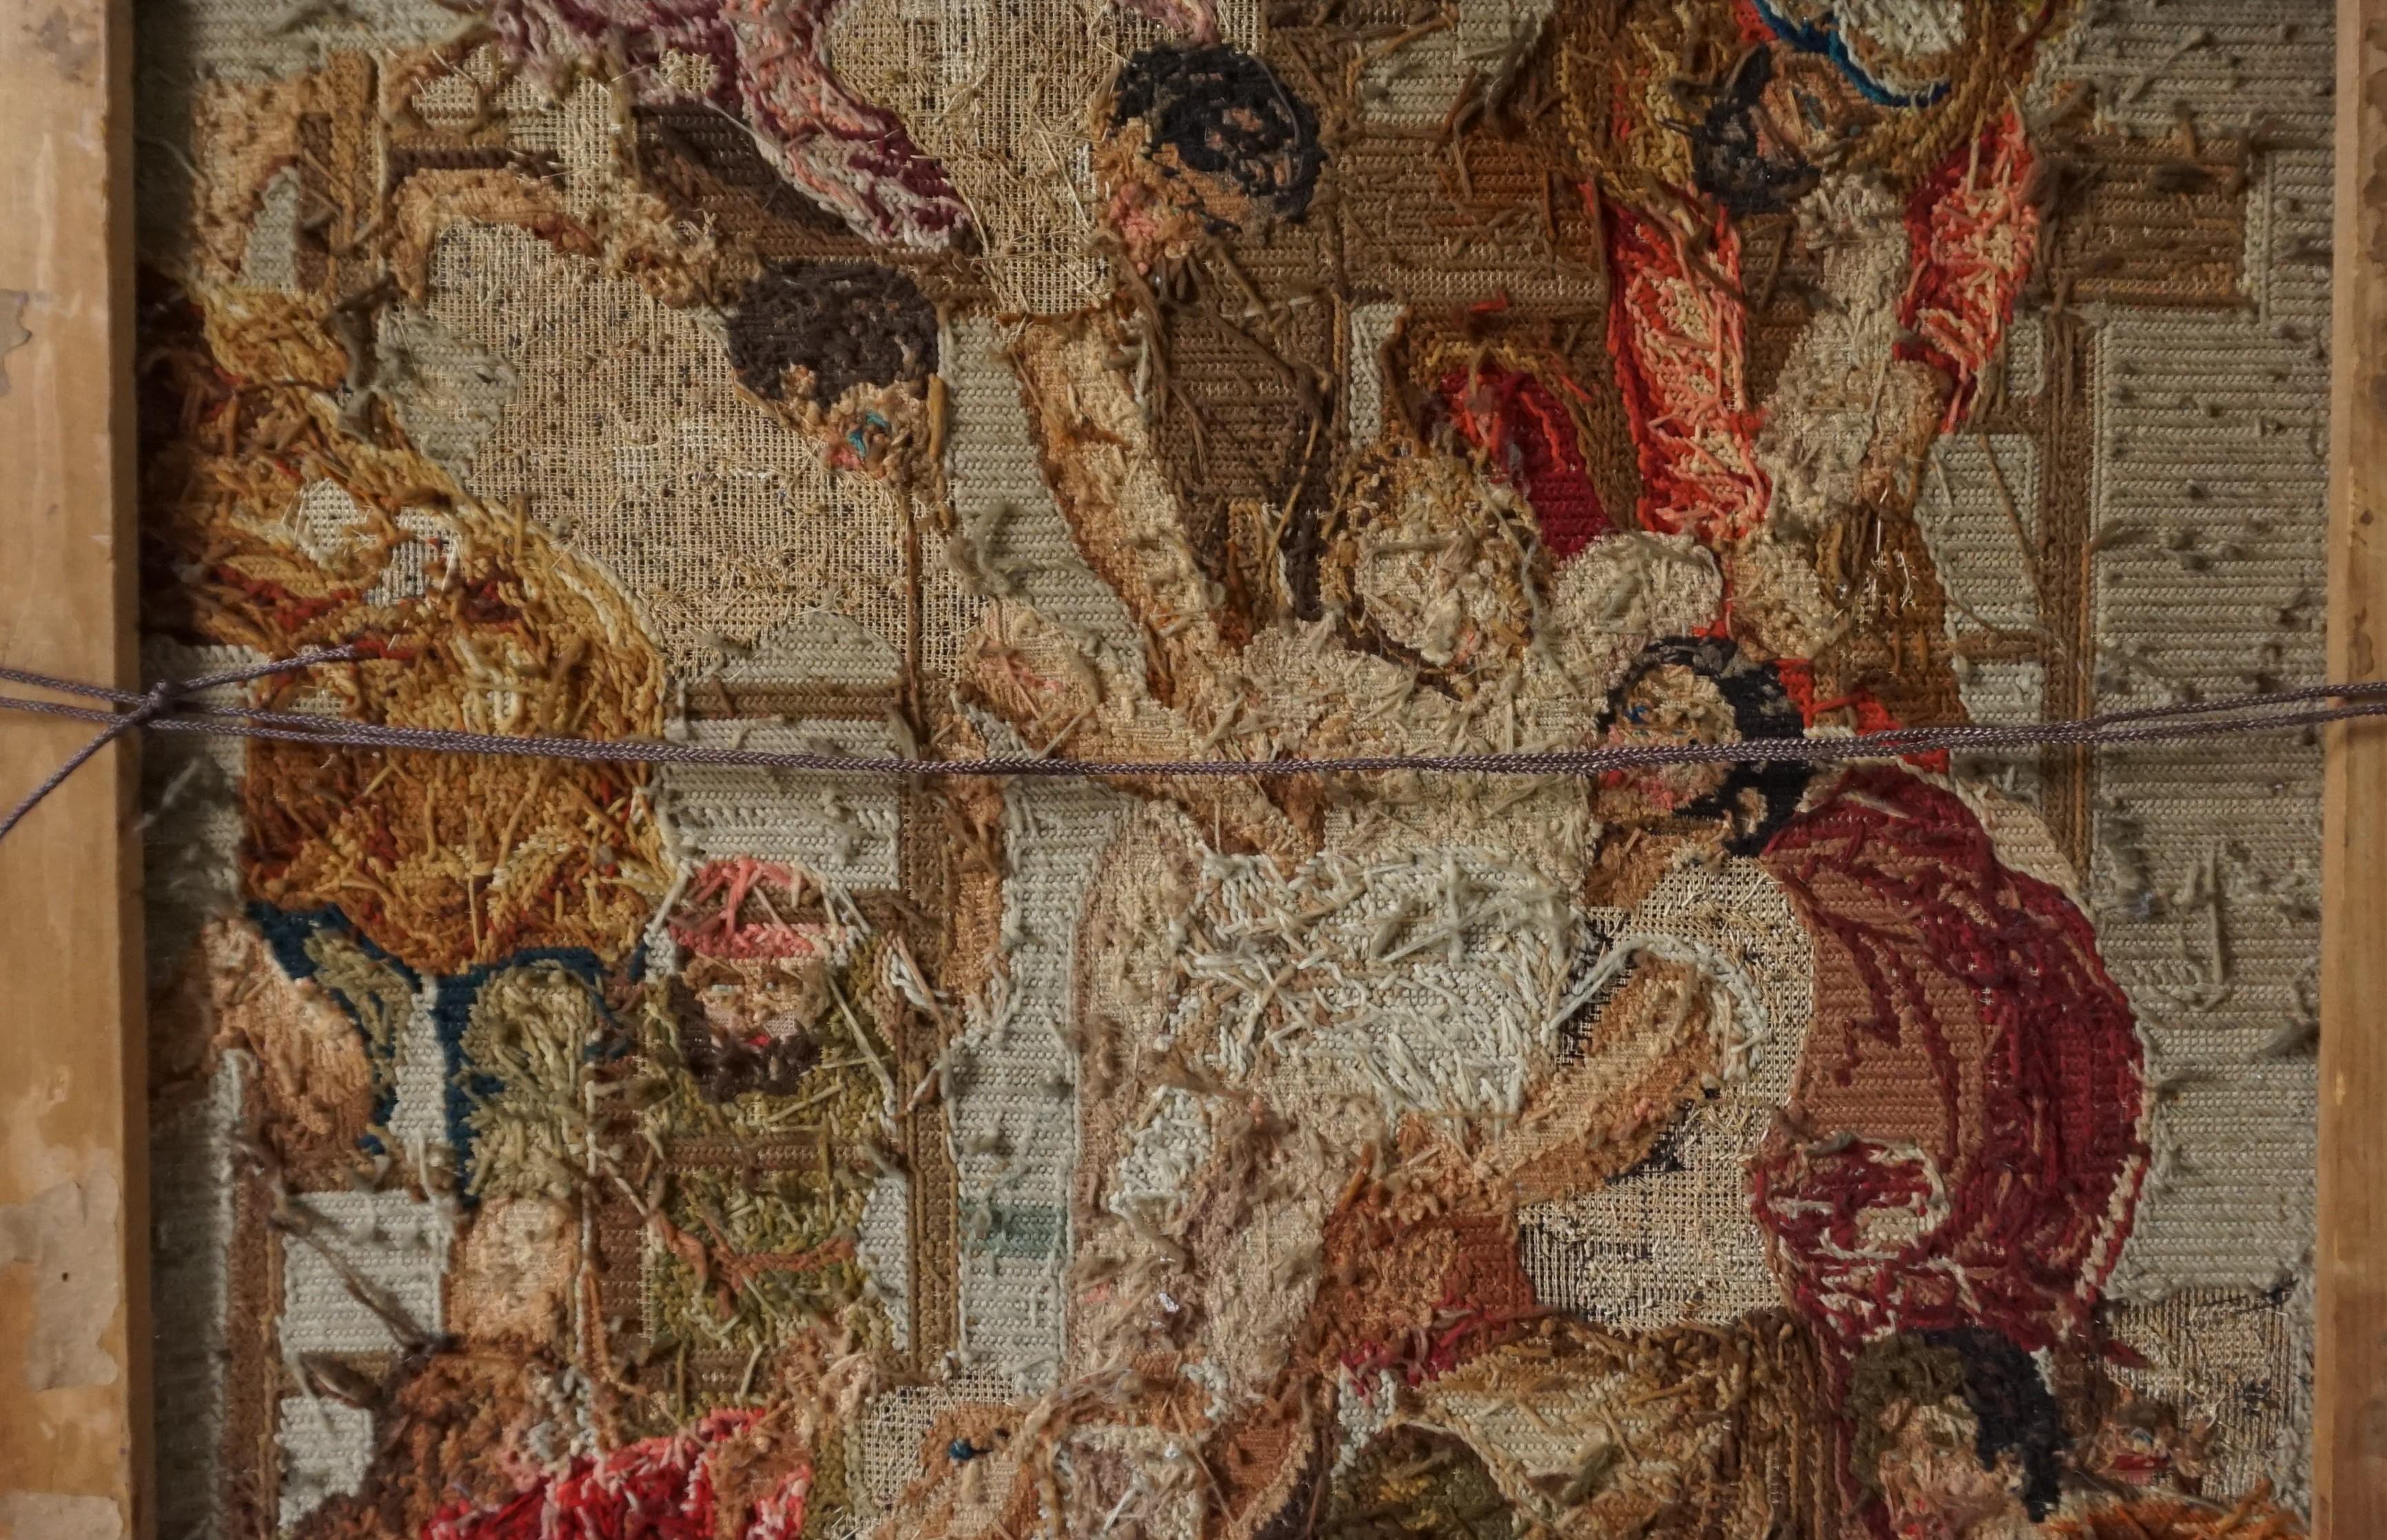 19th Century Stunning Mid-1800s Handcrafted Embroidery of Jesus' Descent from the Cross For Sale